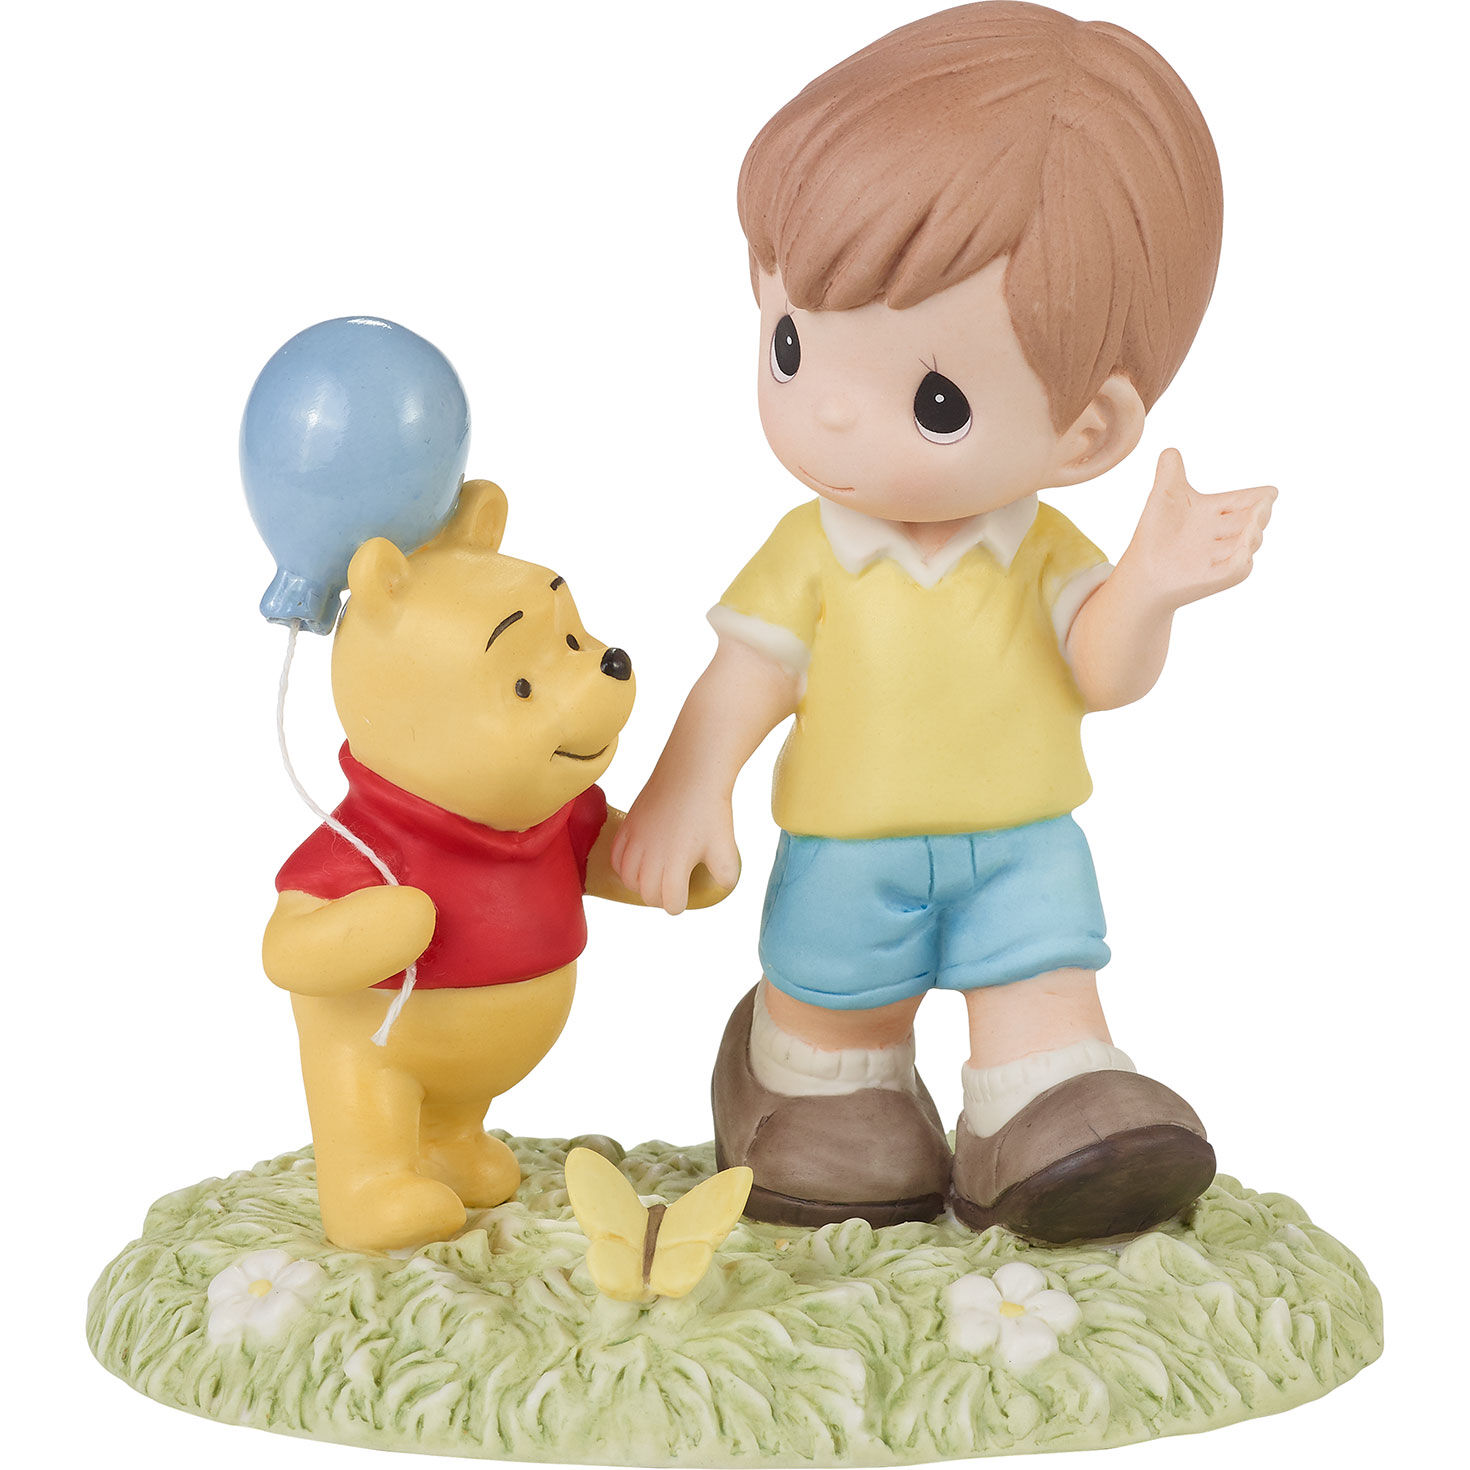 Precious Moments Disney Winnie the Pooh It's Always an Adventure With You Figurine, 5" for only USD 66.99 | Hallmark